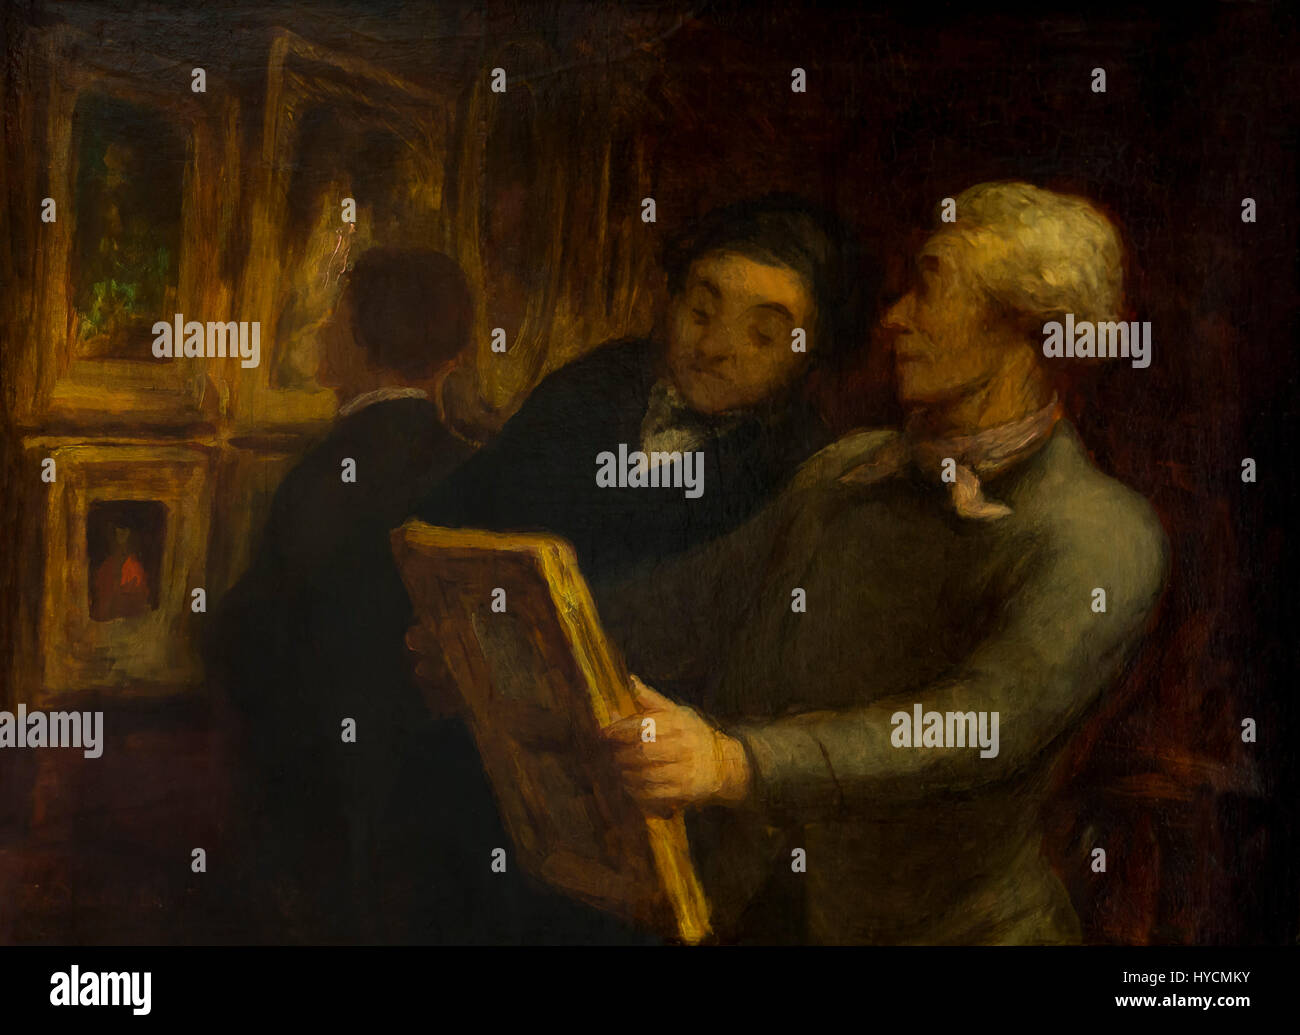 The Painting-Lovers, by Honore Daumier, 1860-1865,Boijmans van Beuningen Museum, Rotterdam, Netherlands, Europe Stock Photo